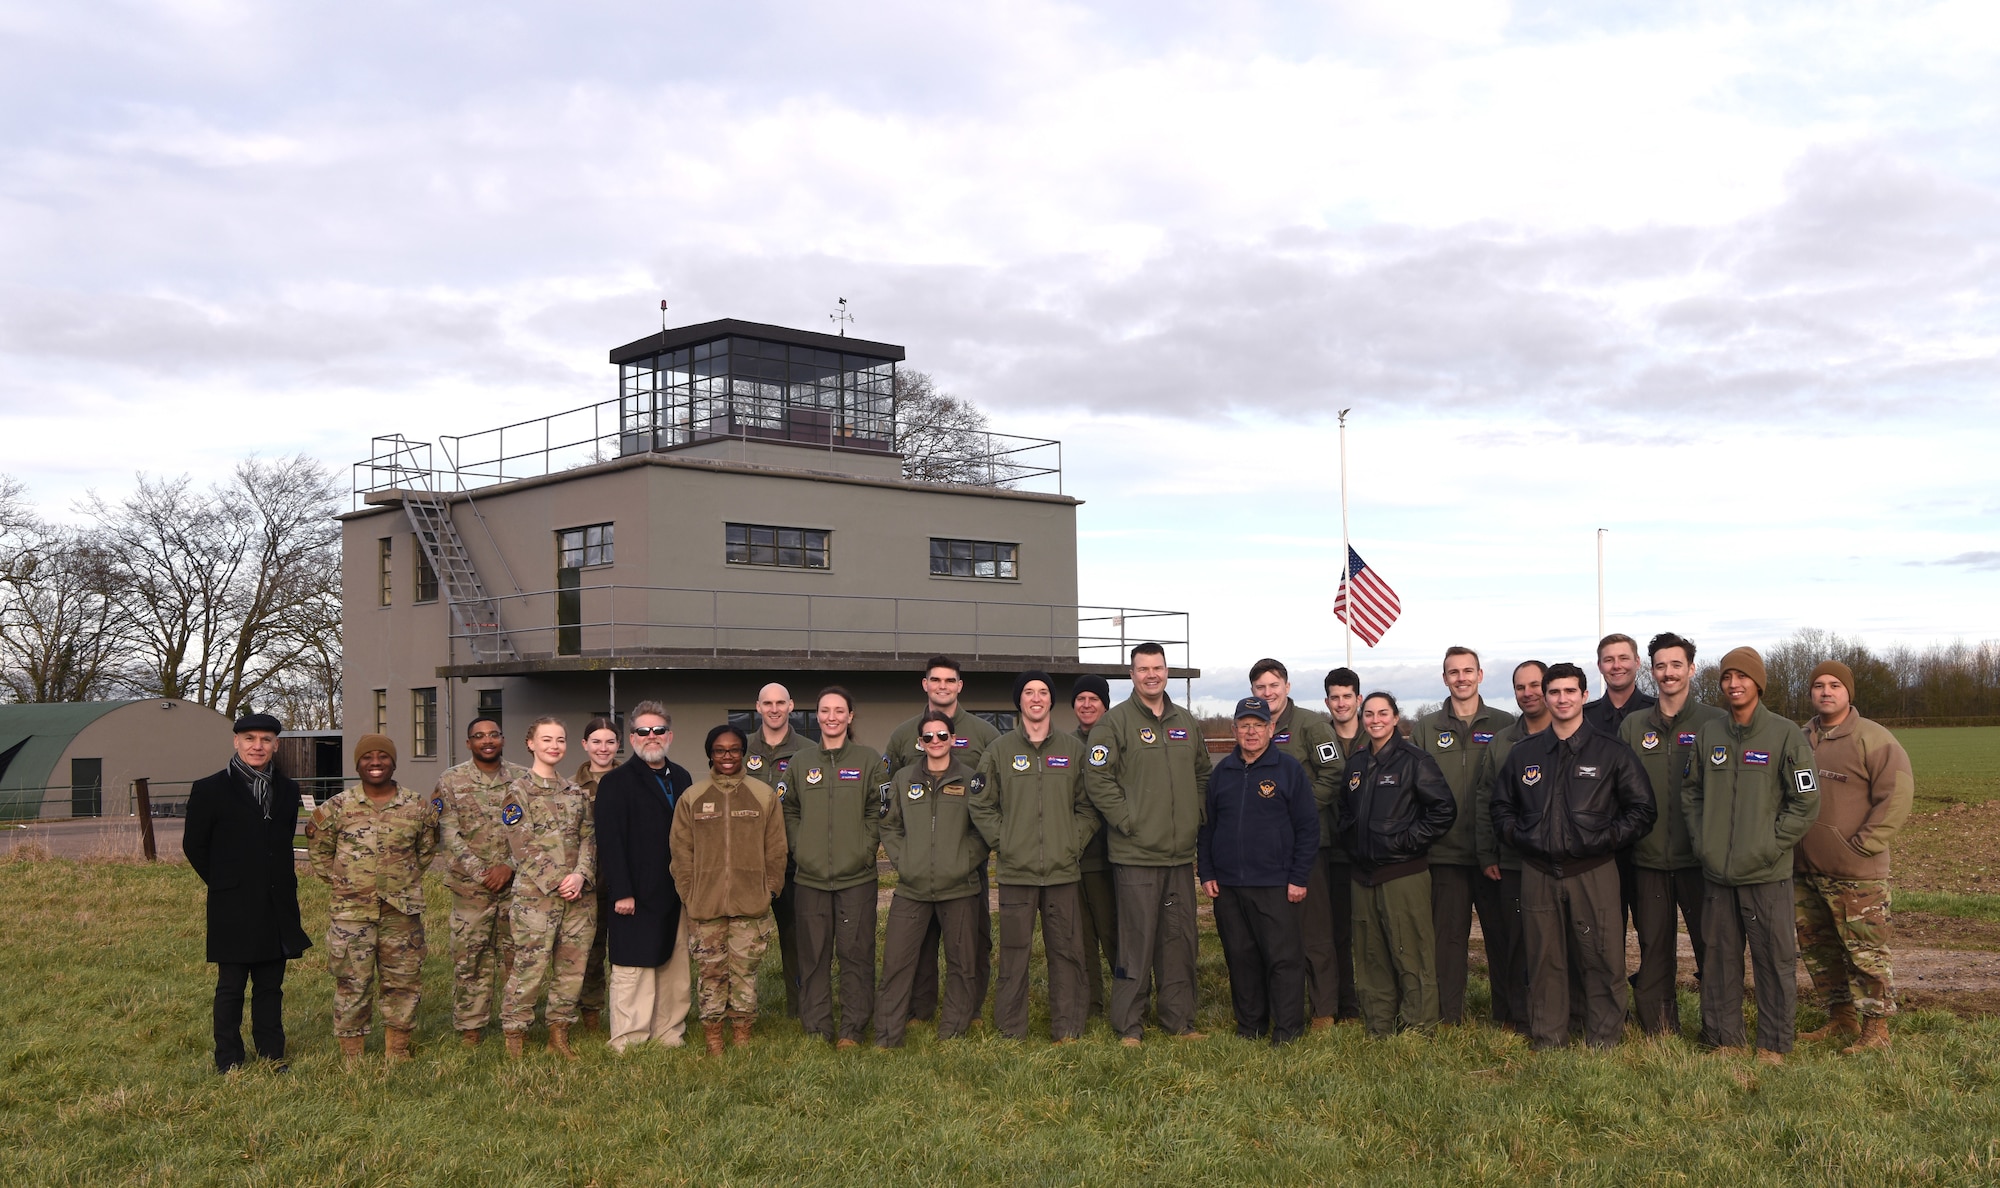 U.S. Air Force Airmen from the 351st Air Refueling Squadron; Rob Paley, 100th Air Refueling Wing historian, and Dr. (Col. ret.) Tom Torkelson, former 100th ARW and 351st ARS commander, gather in front of the air traffic control tower after a patching ceremony at the 100th Bomb Group Memorial Museum, Thorpe Abbotts, England, Feb. 2, 2023. The patching ceremony dates back to World War II and the “Buzzard” patch, presented to pilots and boom operators who have completed mission certification training, is the patch of the 351st Bomb Squadron which flew out of Thorpe Abbotts during World War II. (U.S. Air Force photo by Karen Abeyasekere)